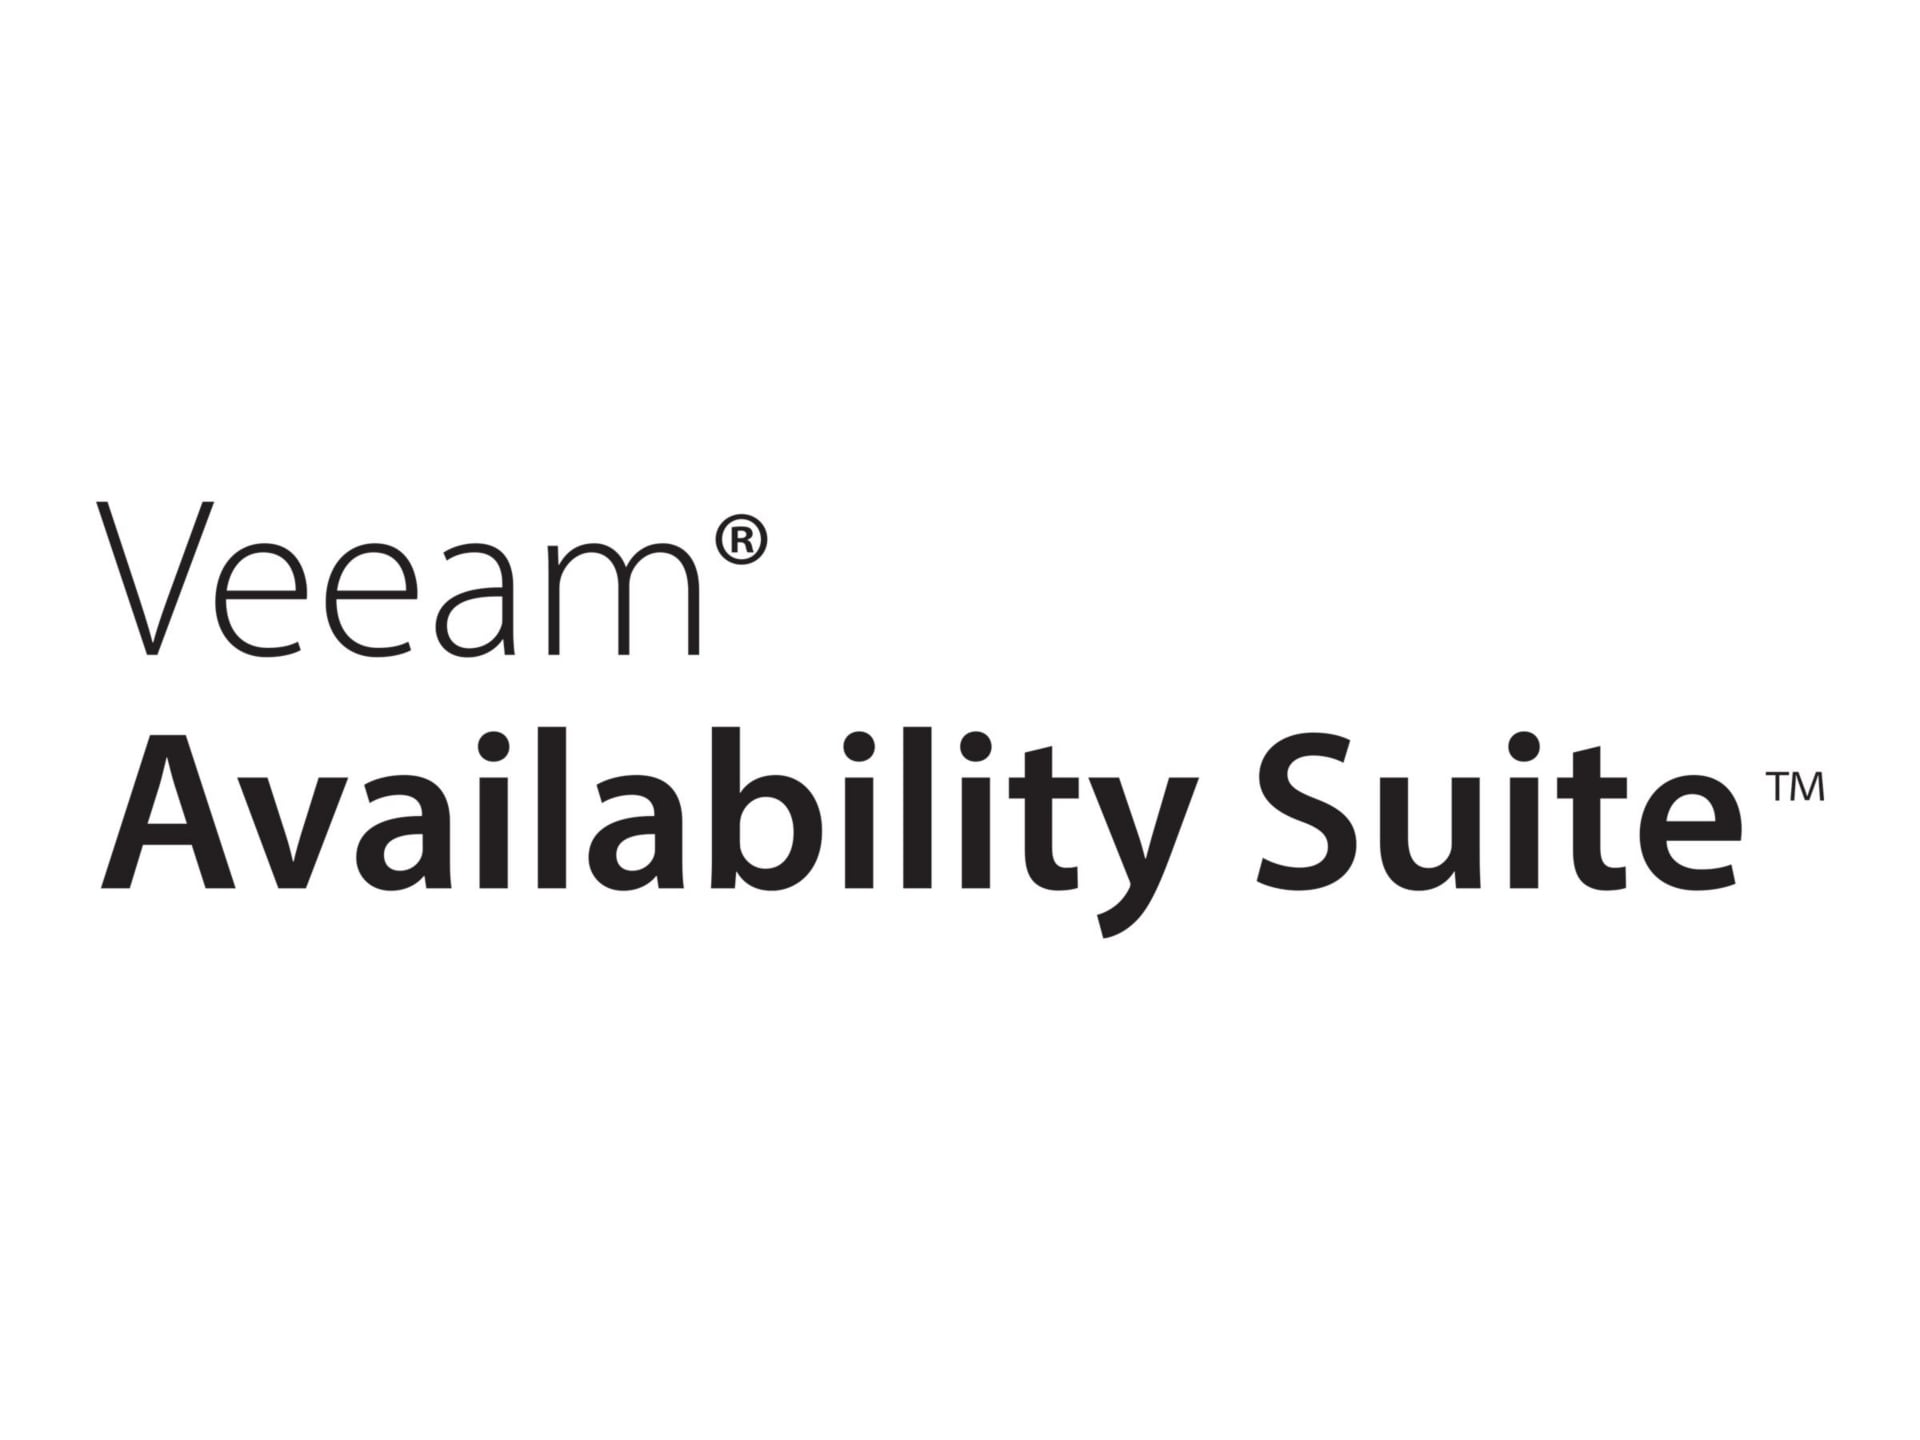 Veeam Availability Suite Universal License - Upfront Billing License (2 yea